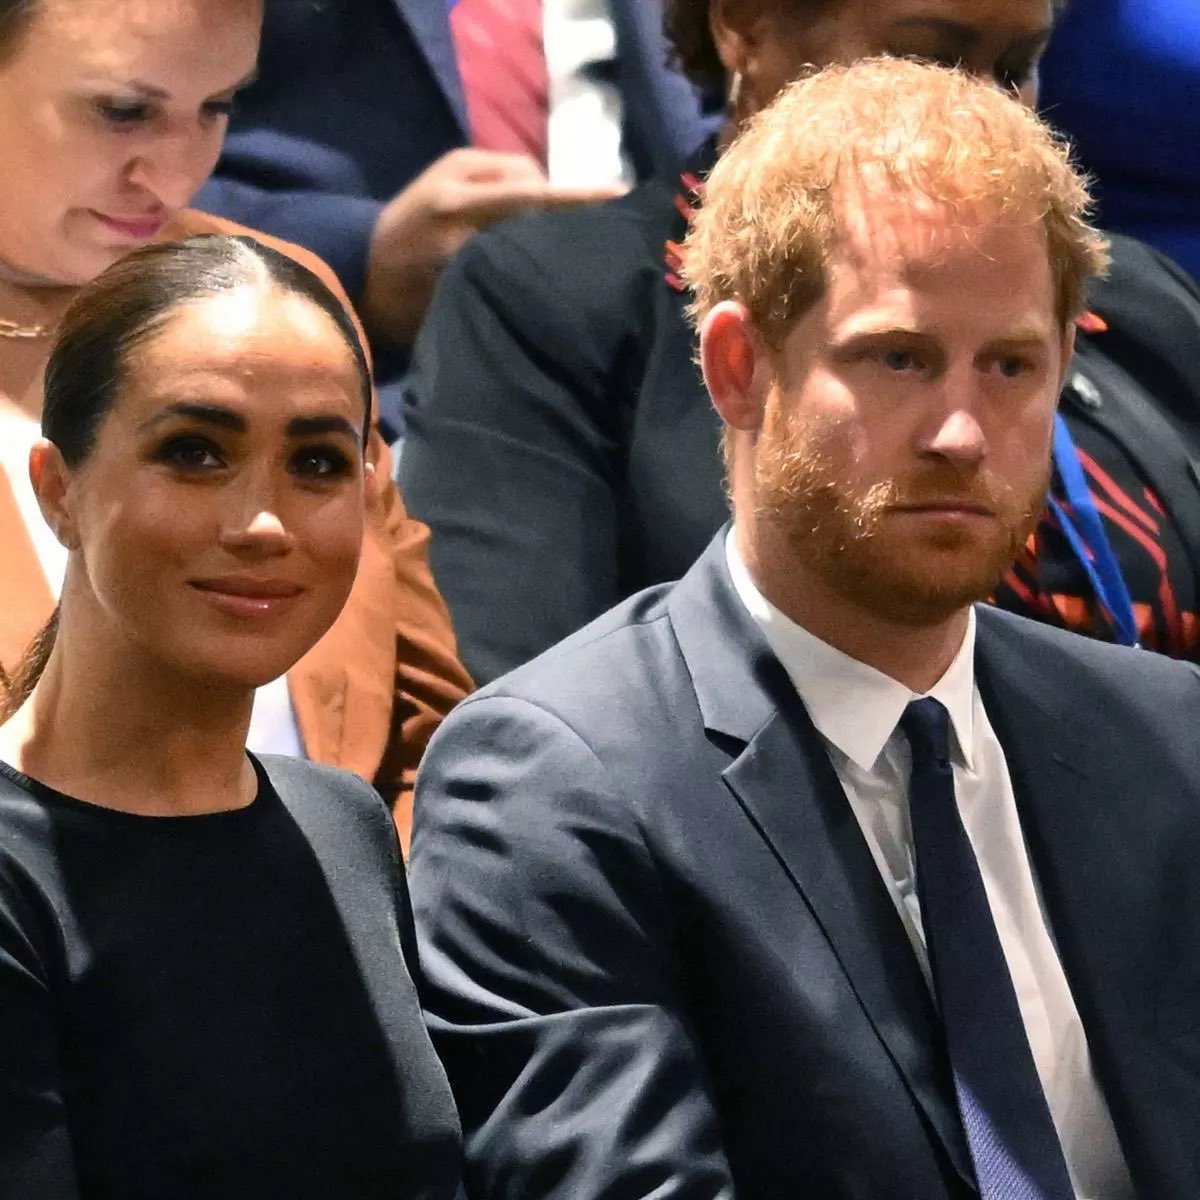 When #MeghanMarkIe divorces #Harry-and she WILL-I wonder if it will all hit him at once-the manipulation, what he’s lost, what he can’t get back,  and just how much he effed up. 
#HarryandMeghan #HarryisaLyingTraitor #MeghanAndHarryAreLiars